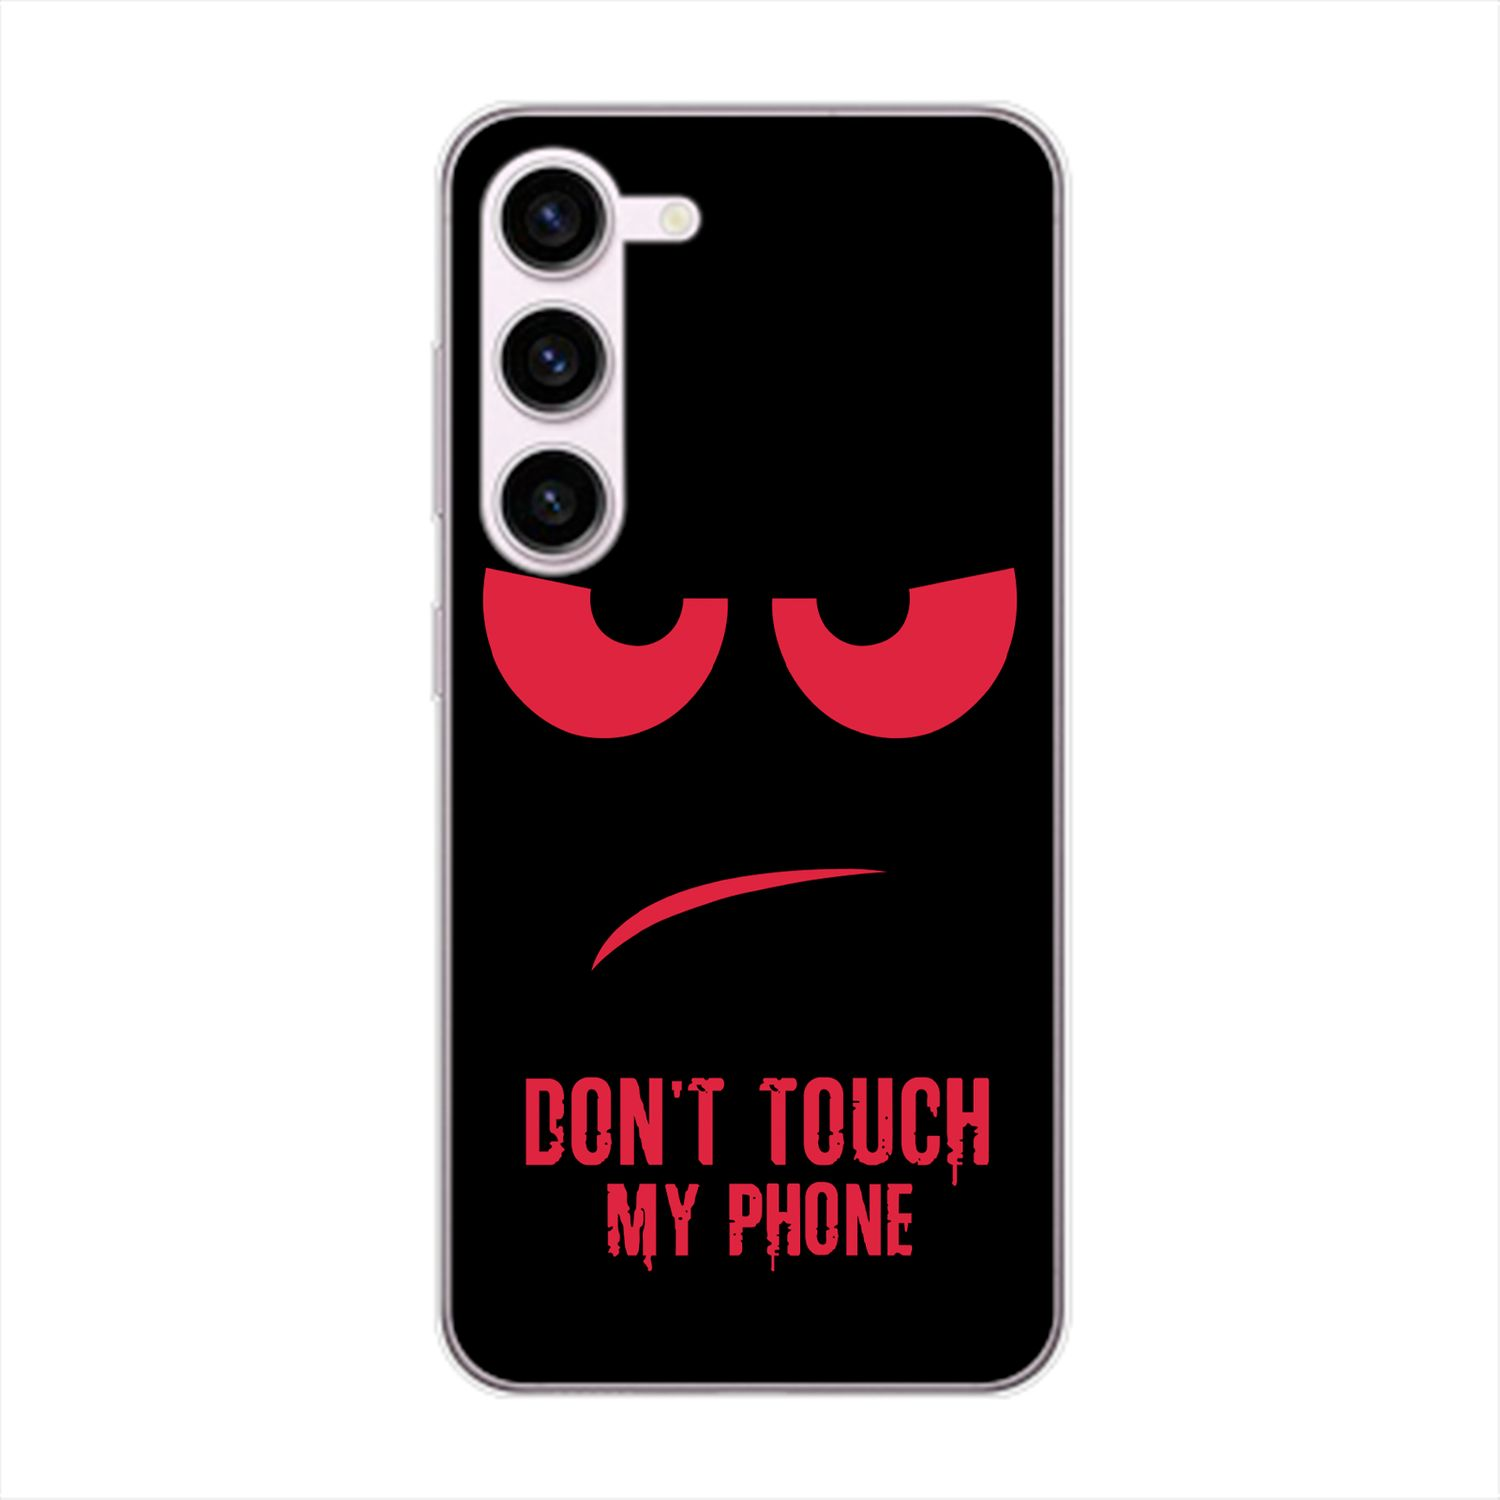 Samsung, Rot KÖNIG Case, Phone Backcover, Galaxy S23 Plus, Dont DESIGN My Touch